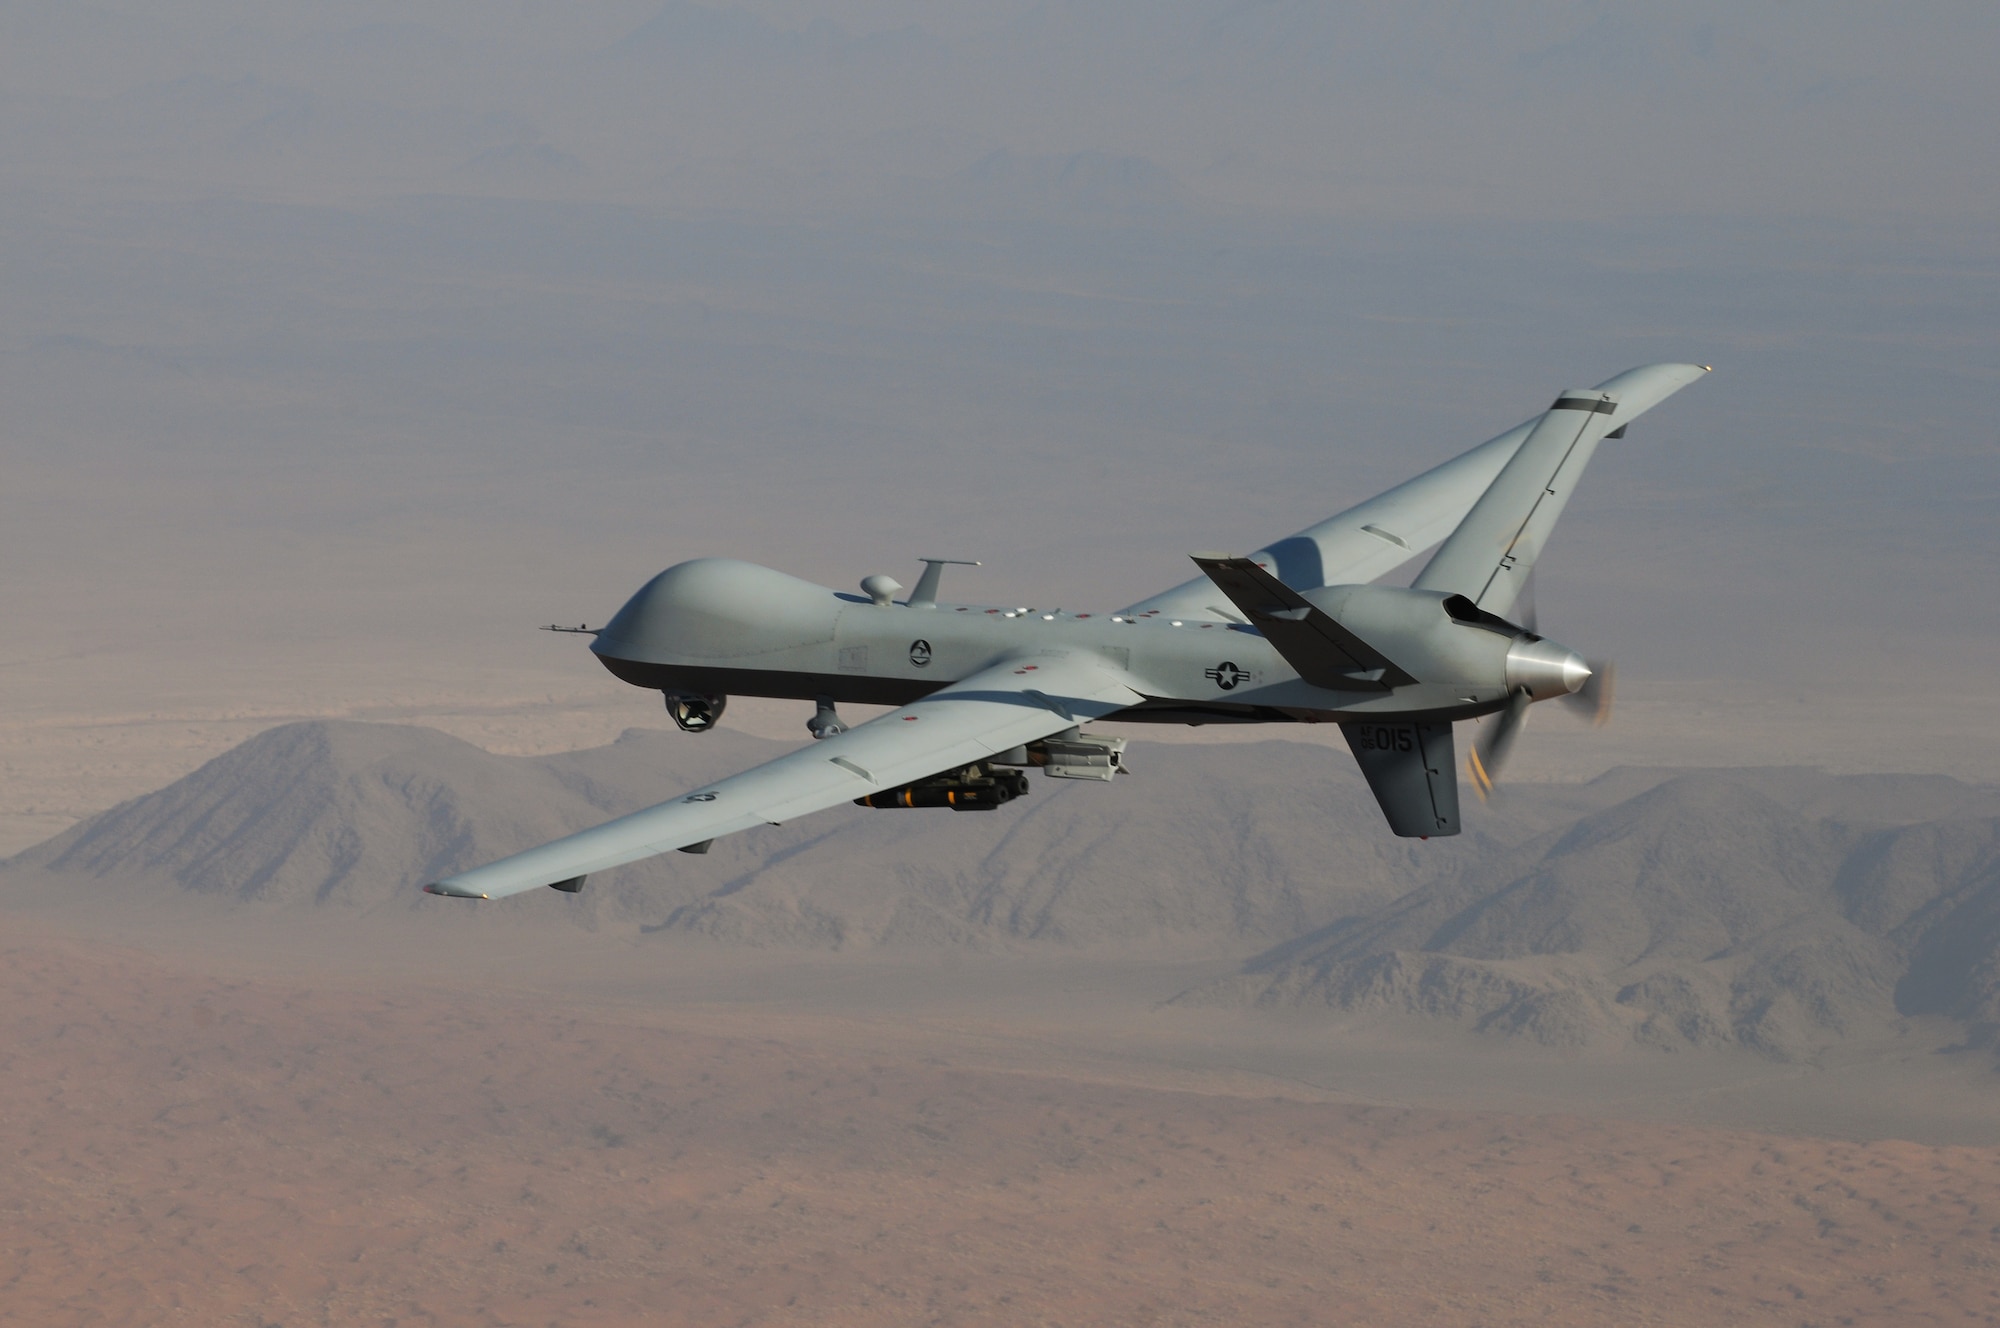 WSJ: General Atomics offers to sell Ukraine two MQ-9 Reaper UAVs for $1, but training and transporting the drones will cost $10,000,000